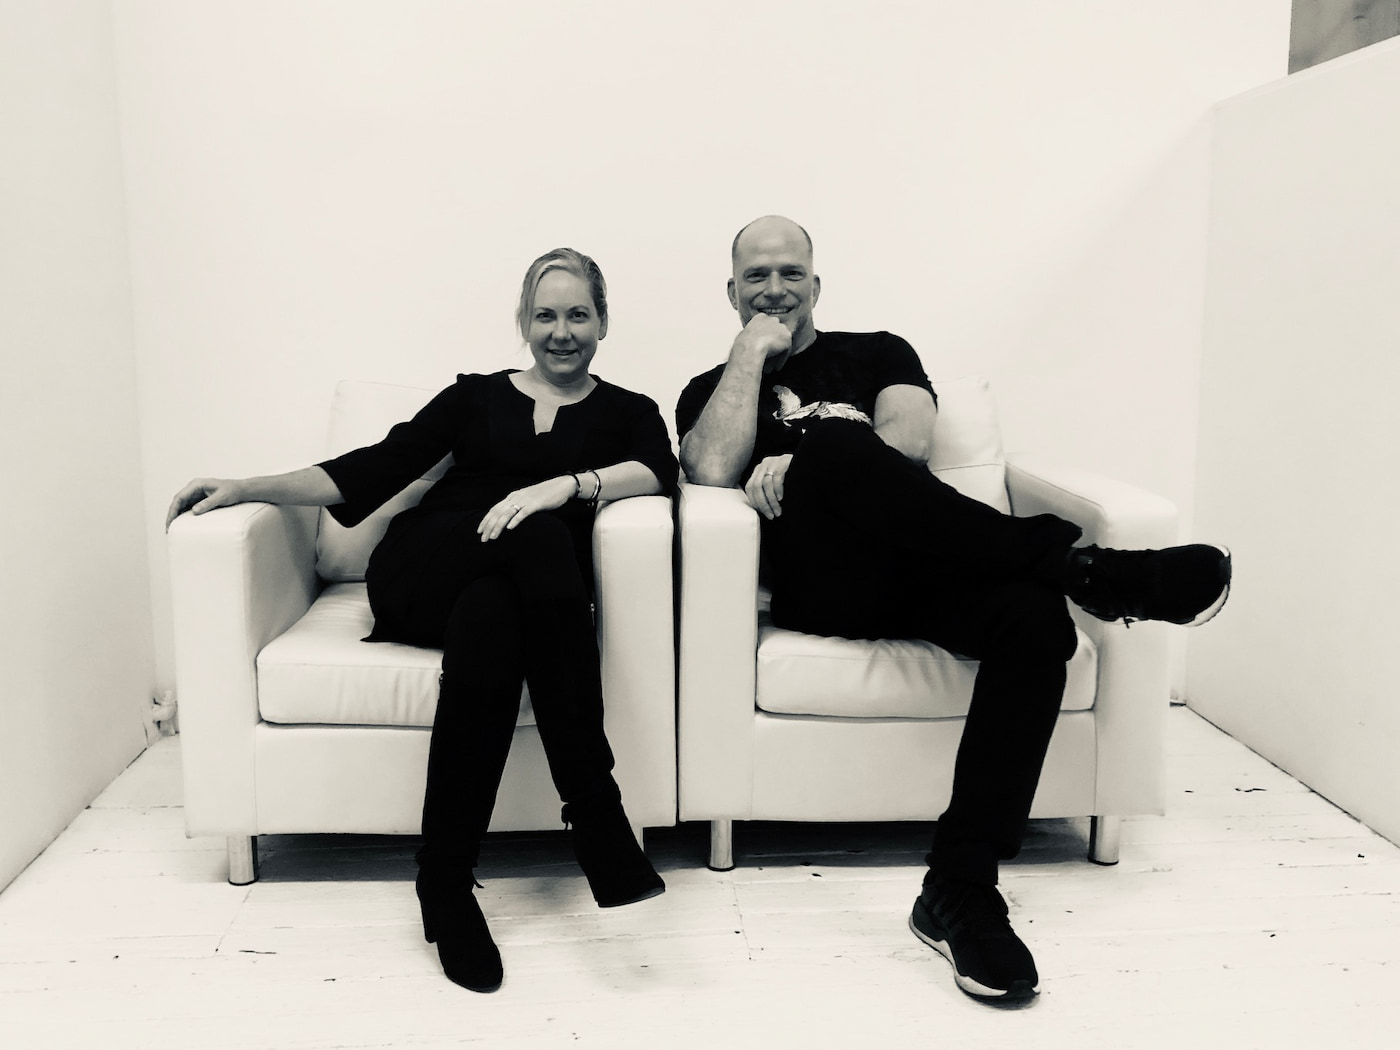 Co-founders of Masami, siting on white chairs